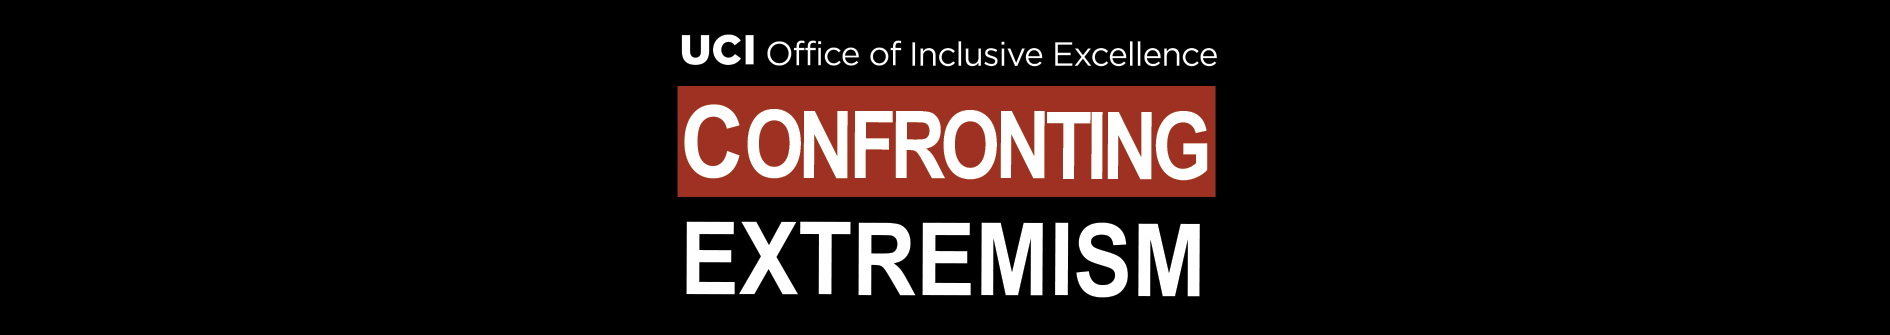 confronting extremism banner